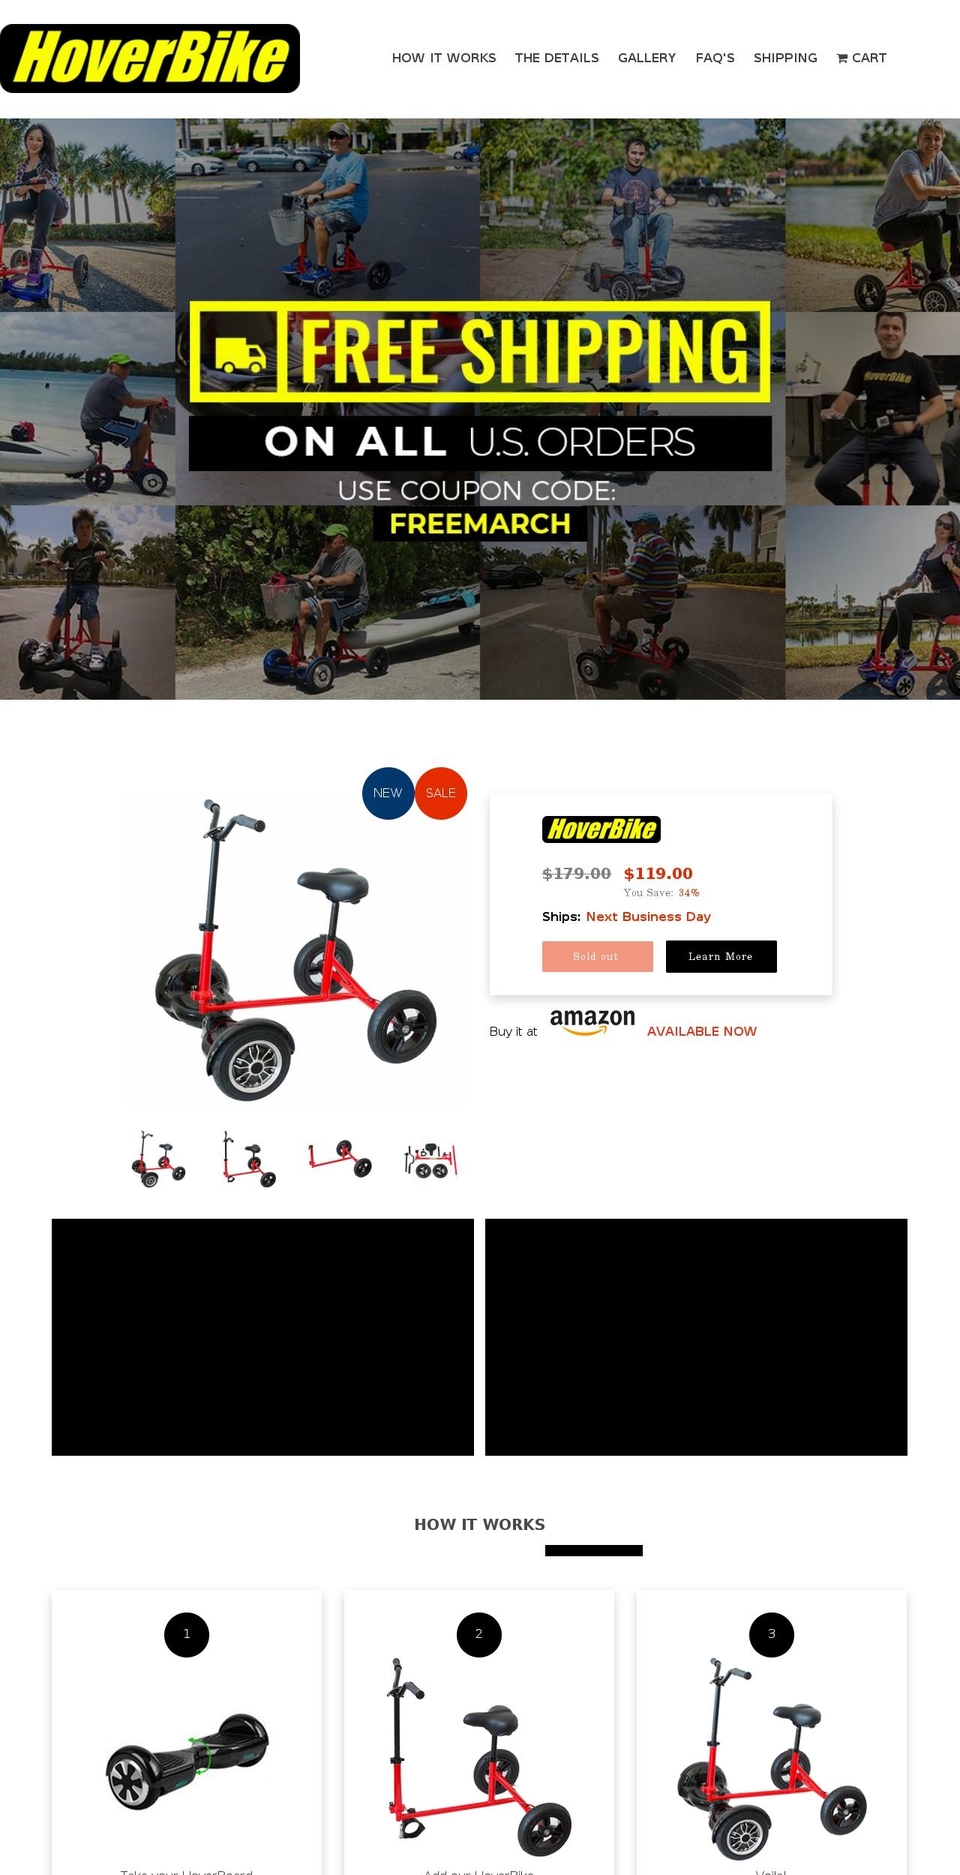 Copy of Debut Shopify theme site example hoverbikestore.com